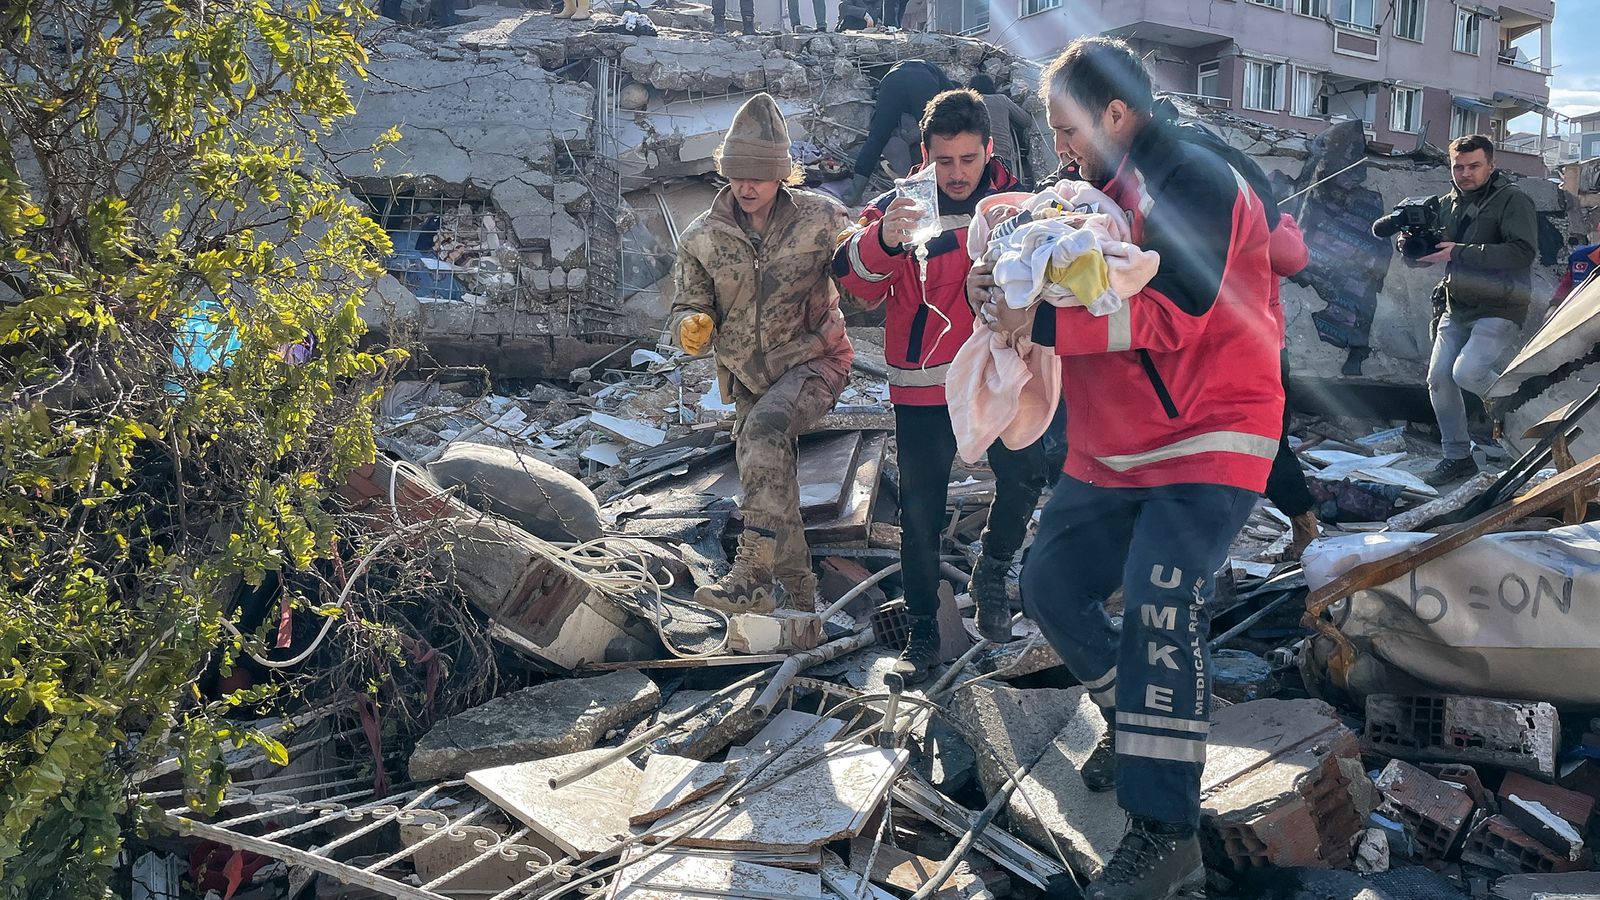 Turkey-Syria earthquake: Anger and frustration as search for trapped relatives continues - 'we're being left to die'